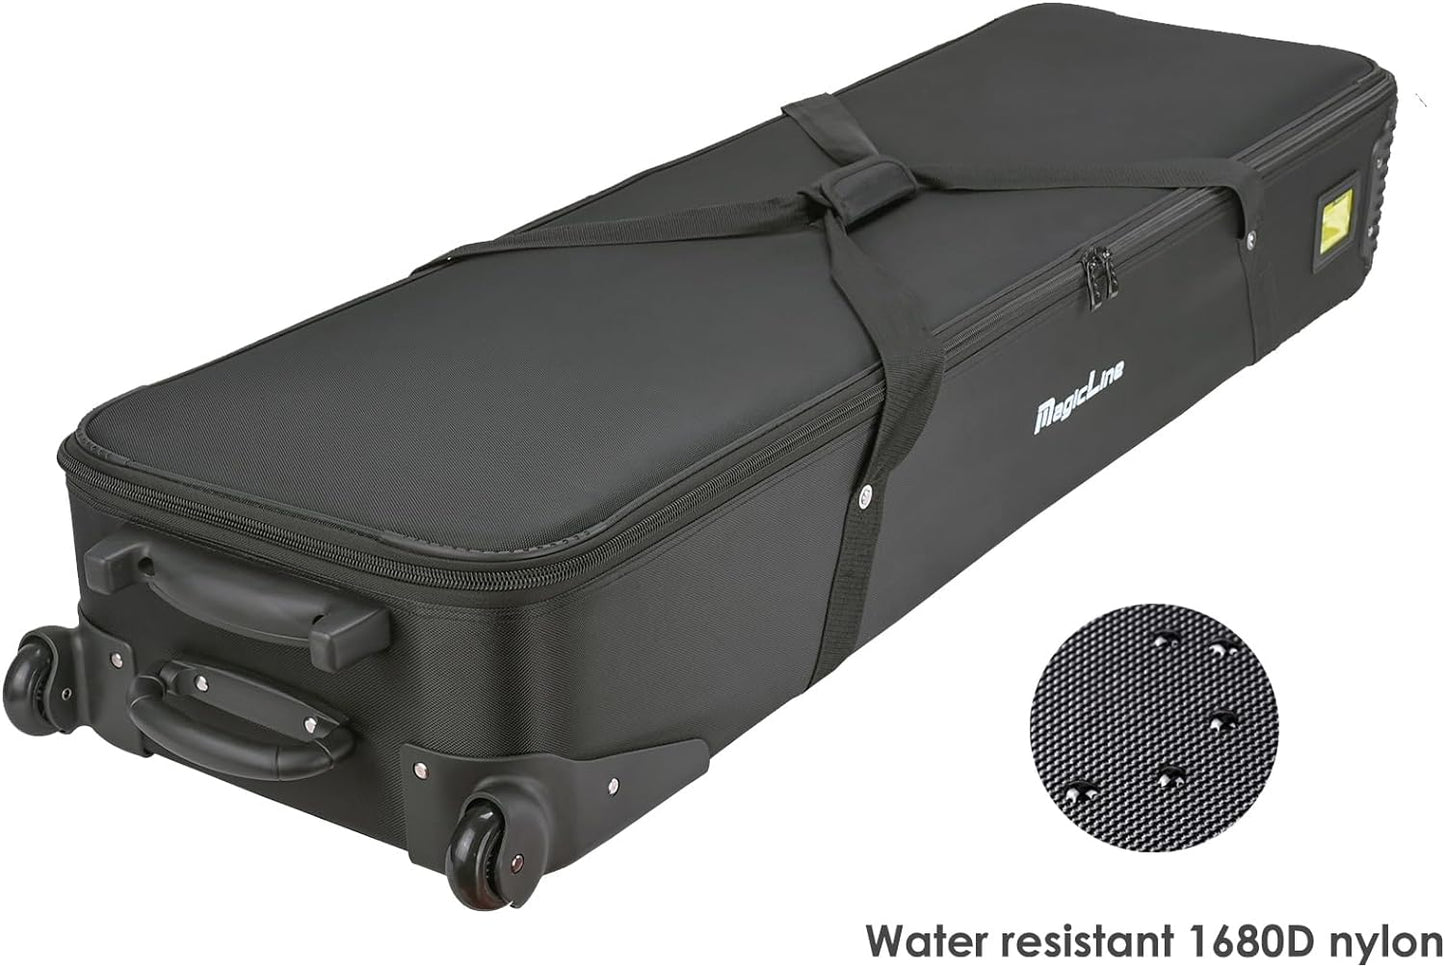 MagicLine Rolling Case for Three&nbsp;C Stands with Removable Base 56.3x15.7x8.7 inch/143x40x22 cm, Studio Trolley Case, Carrying Bag with Wheels for C stands, Light Stands and Tripods